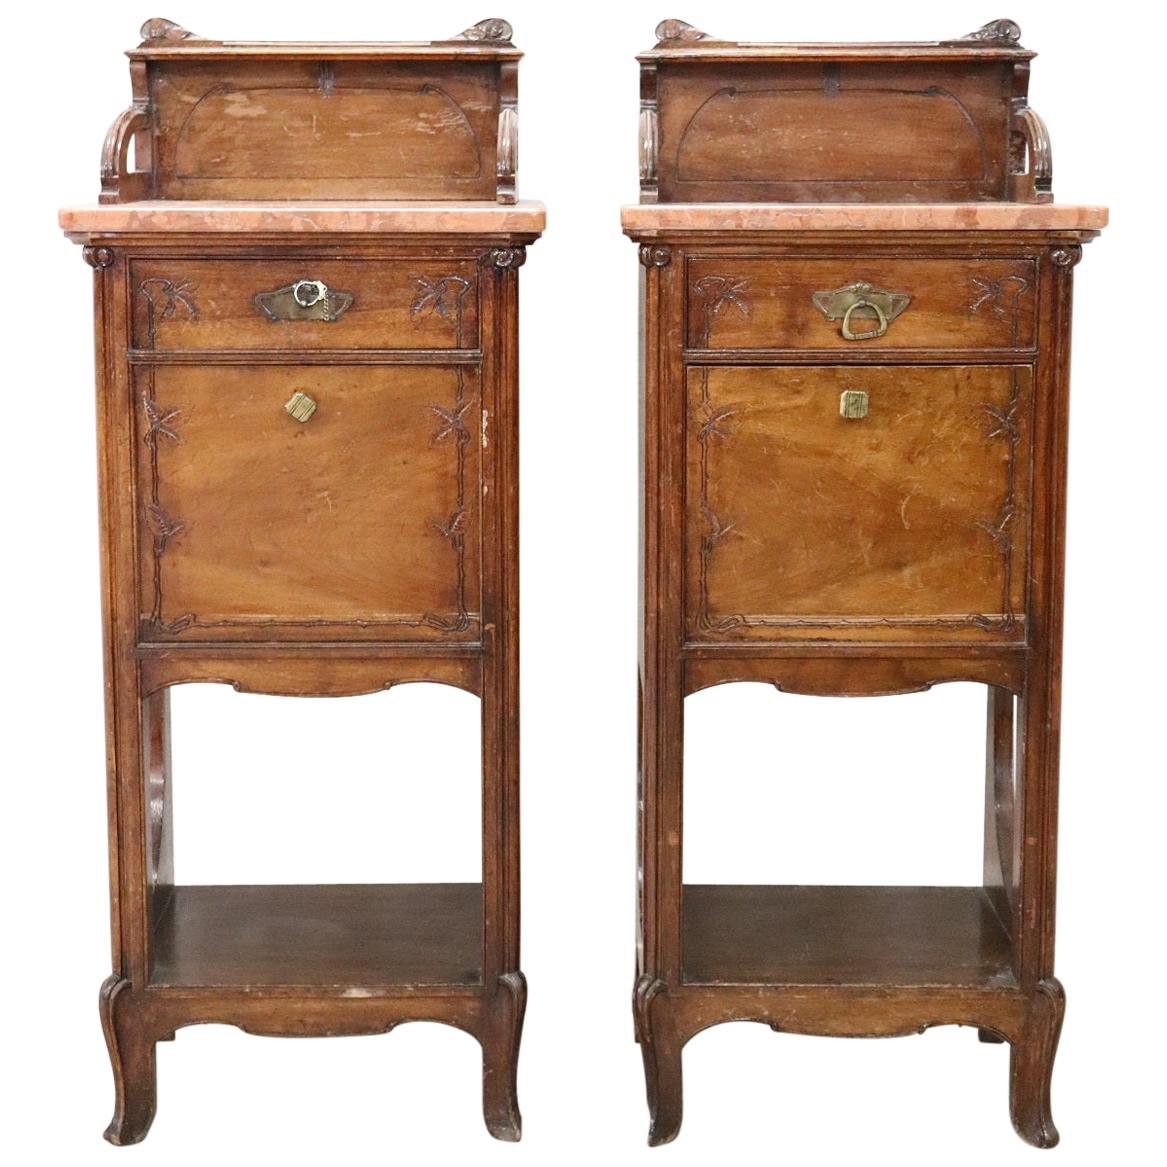 19th Century Italian Art Nouveau Walnut with Marble-Top Pair of Nightstand